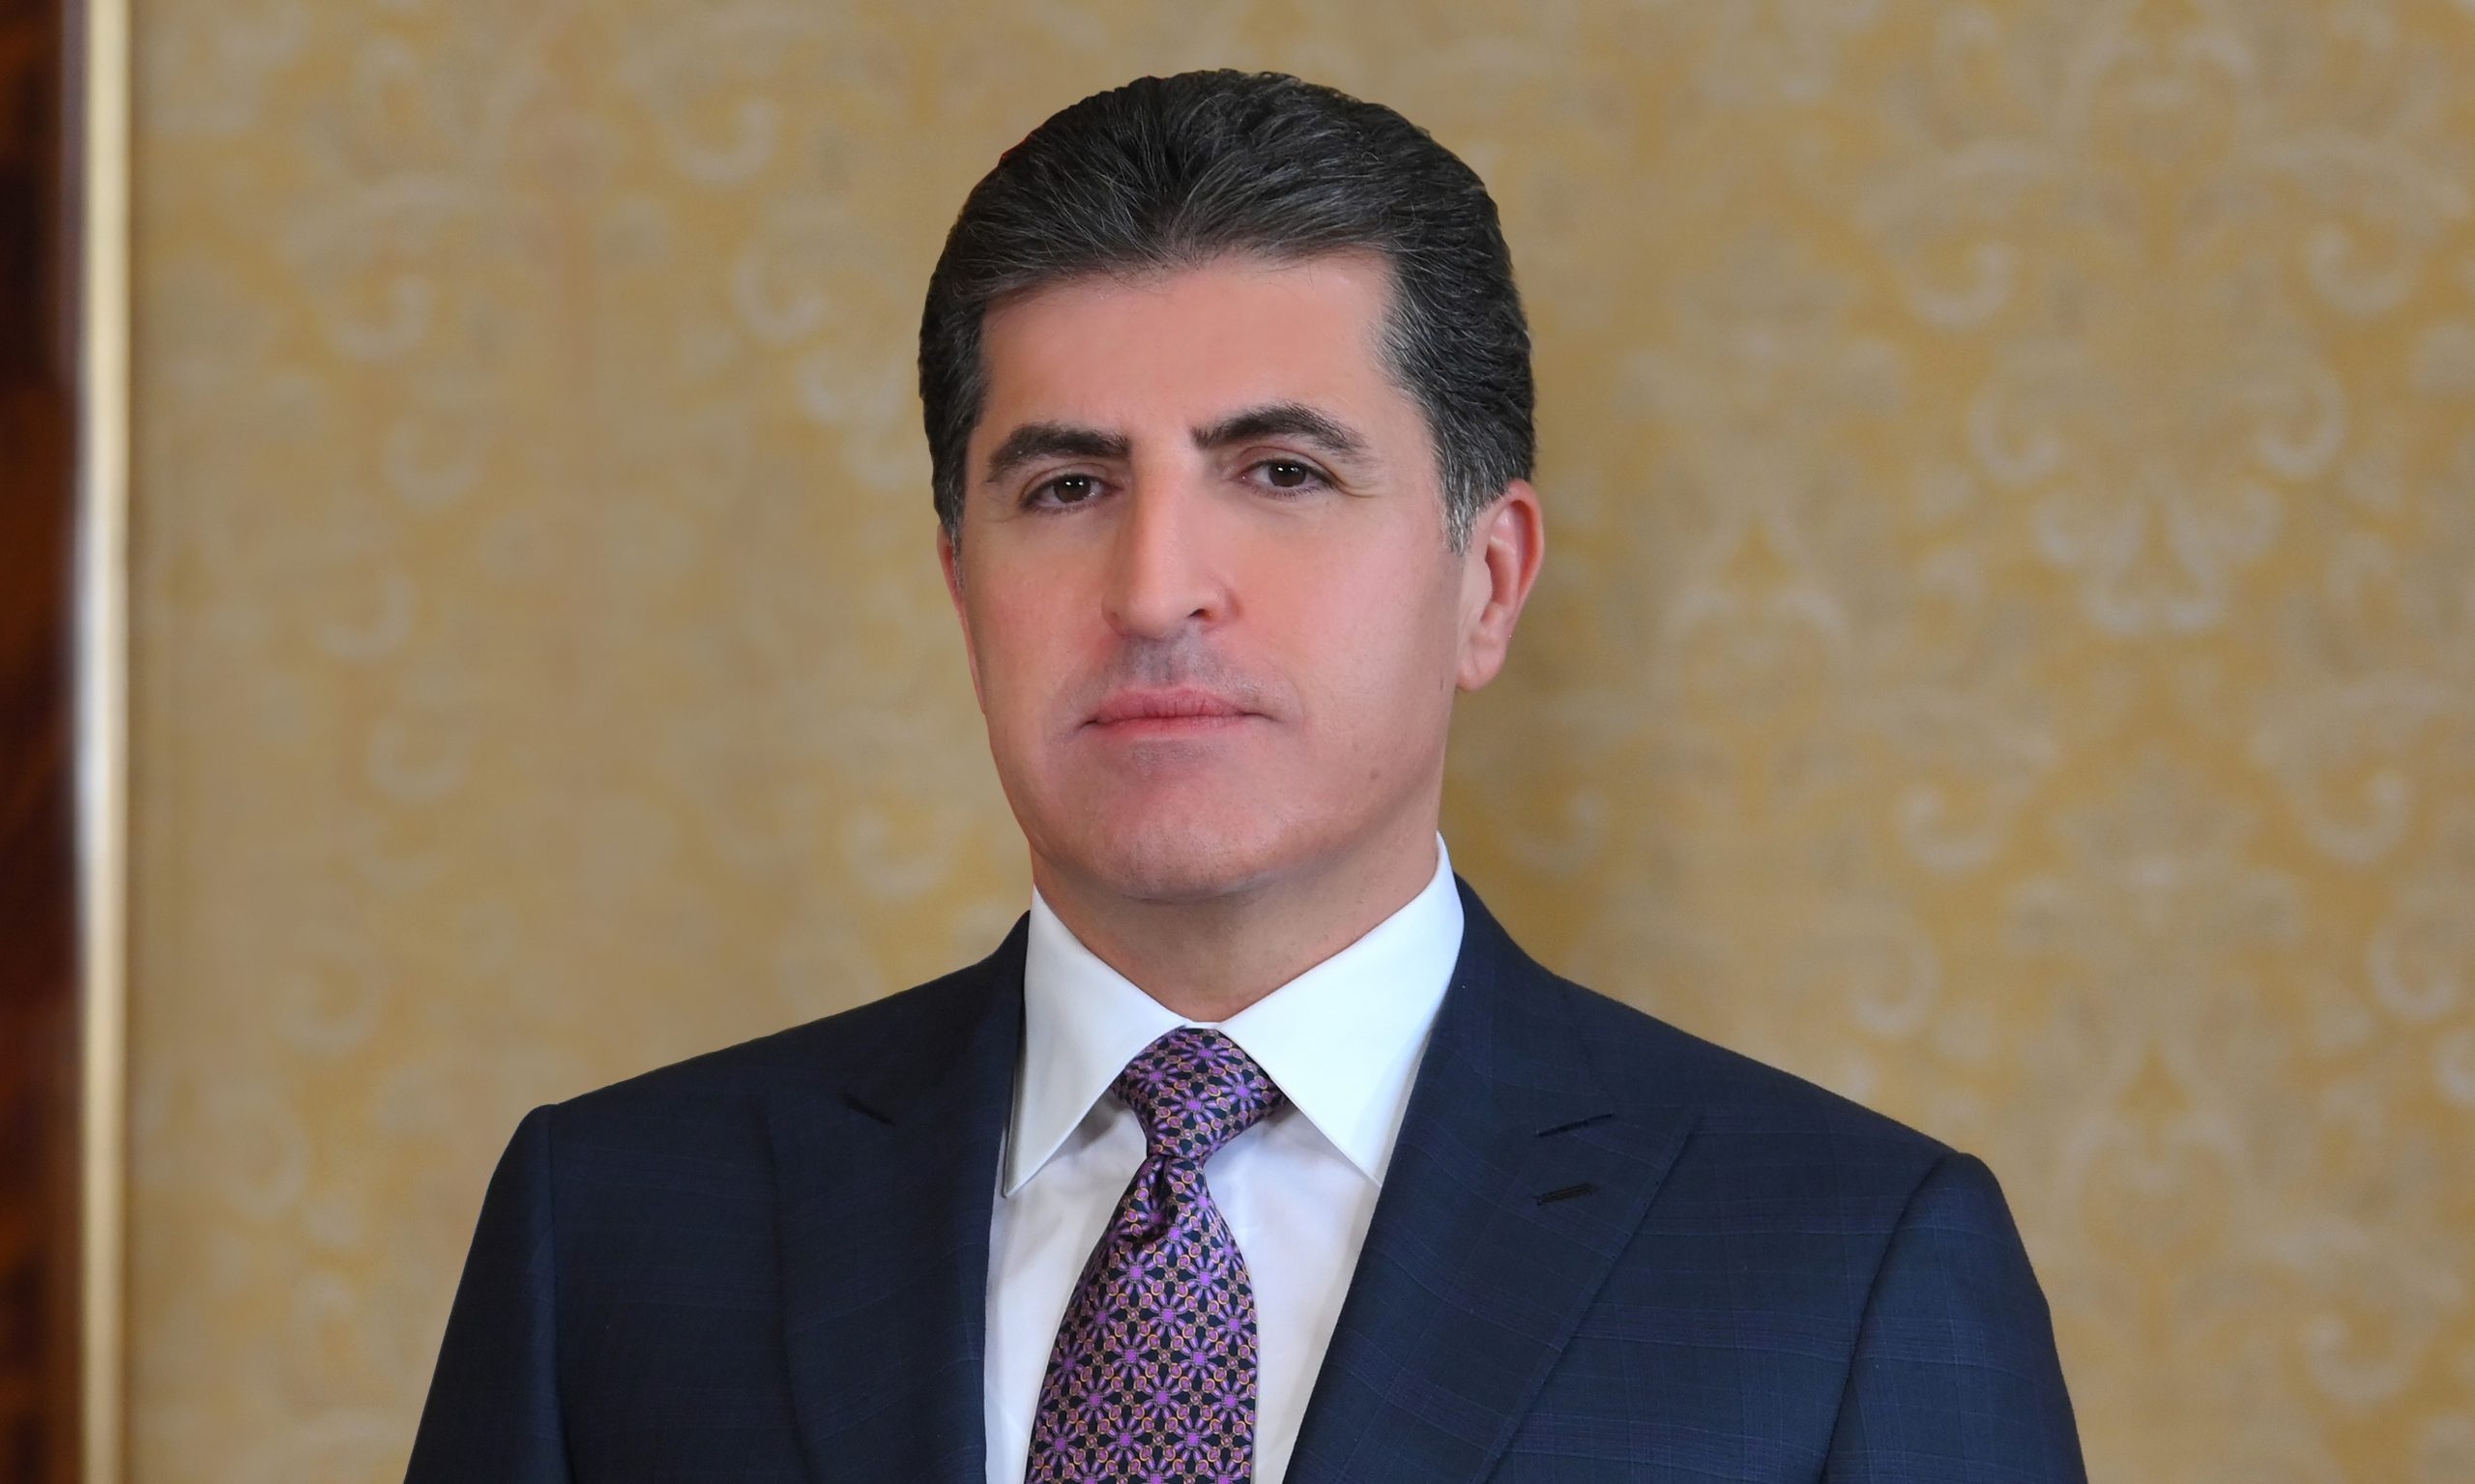 President Nechirvan Barzani’s statement on the anniversary of the genocidal Anfal campaigns in Badinan